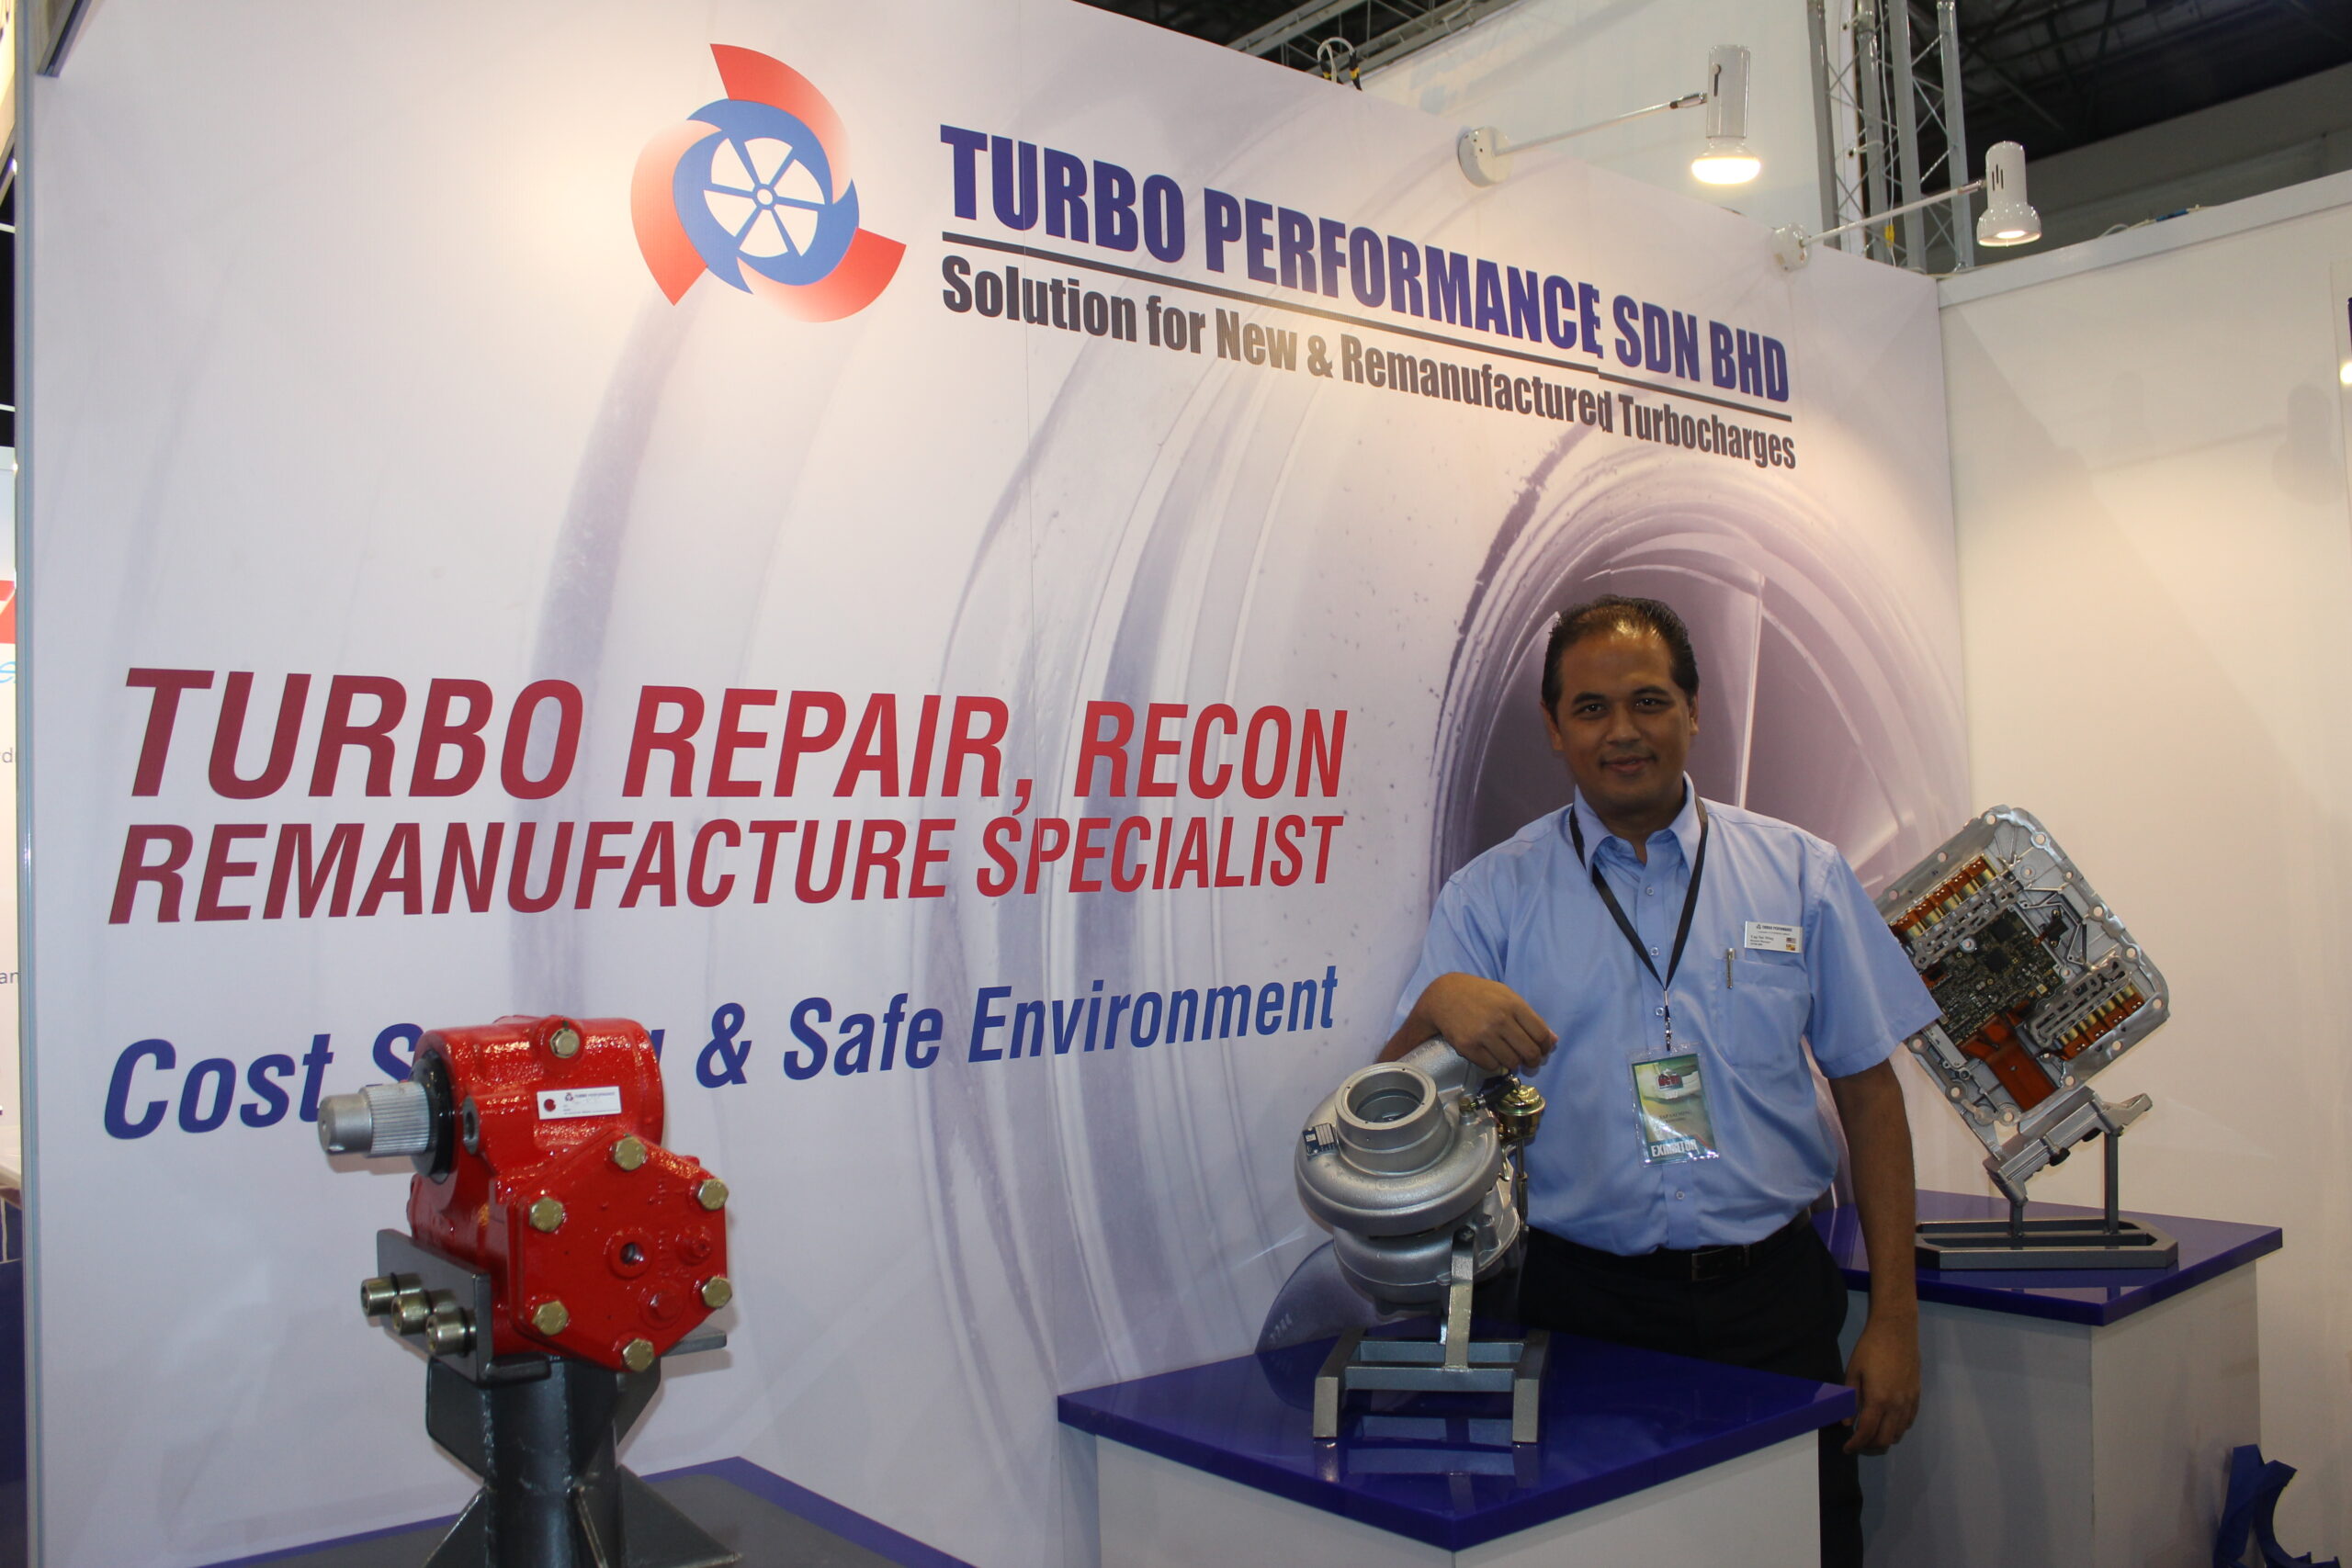 Turbo Performance Solutions